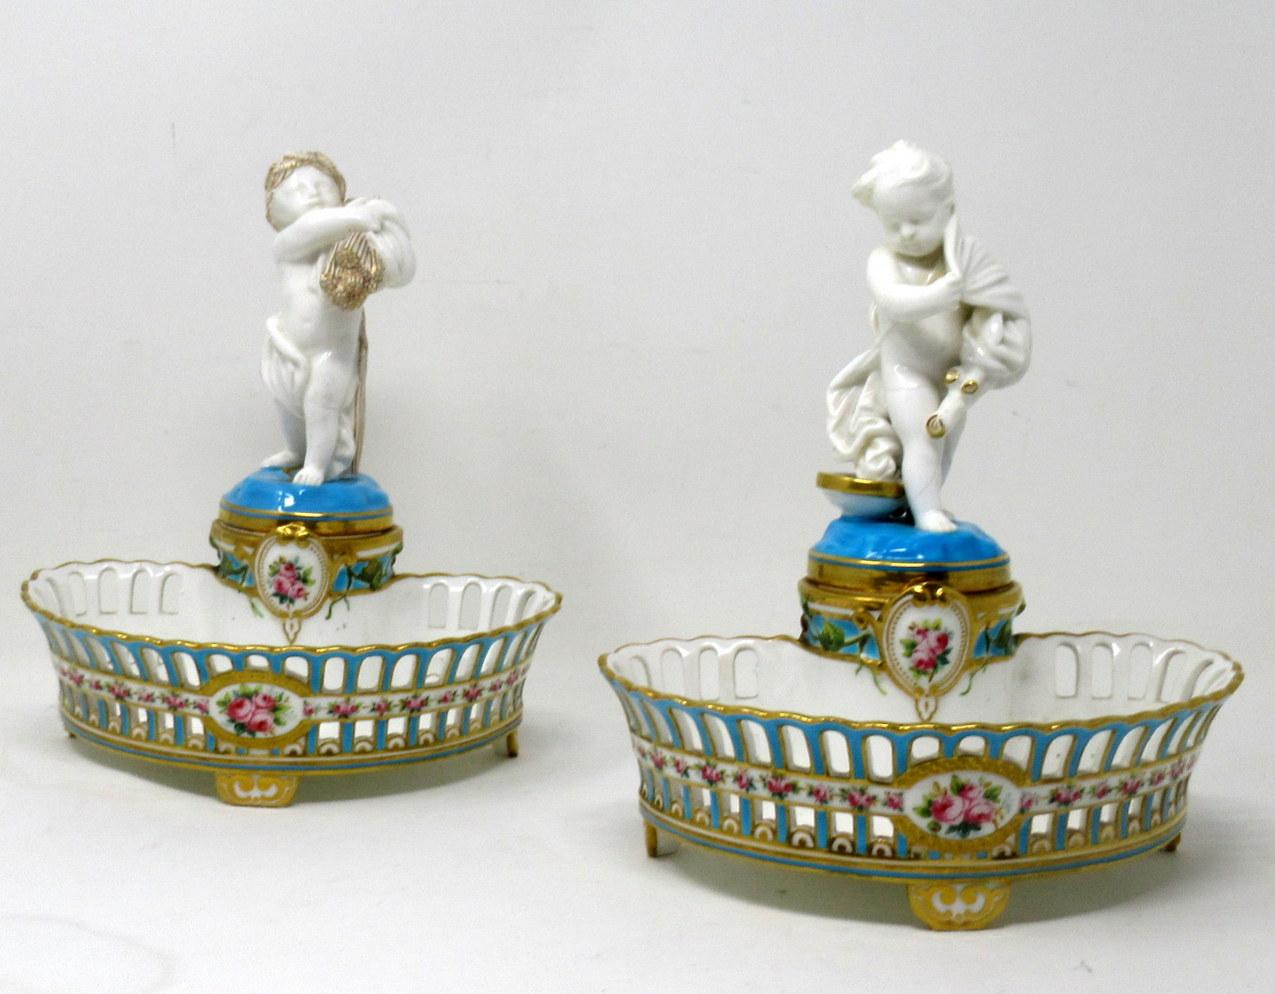 Stunning example of a pair of English Minton porcelain centerpieces or flower vases, each modelled as a standing cherub one harvesting wheat, both ending with stunning pierced oval centerpieces on footed supports. Circa third quarter of the